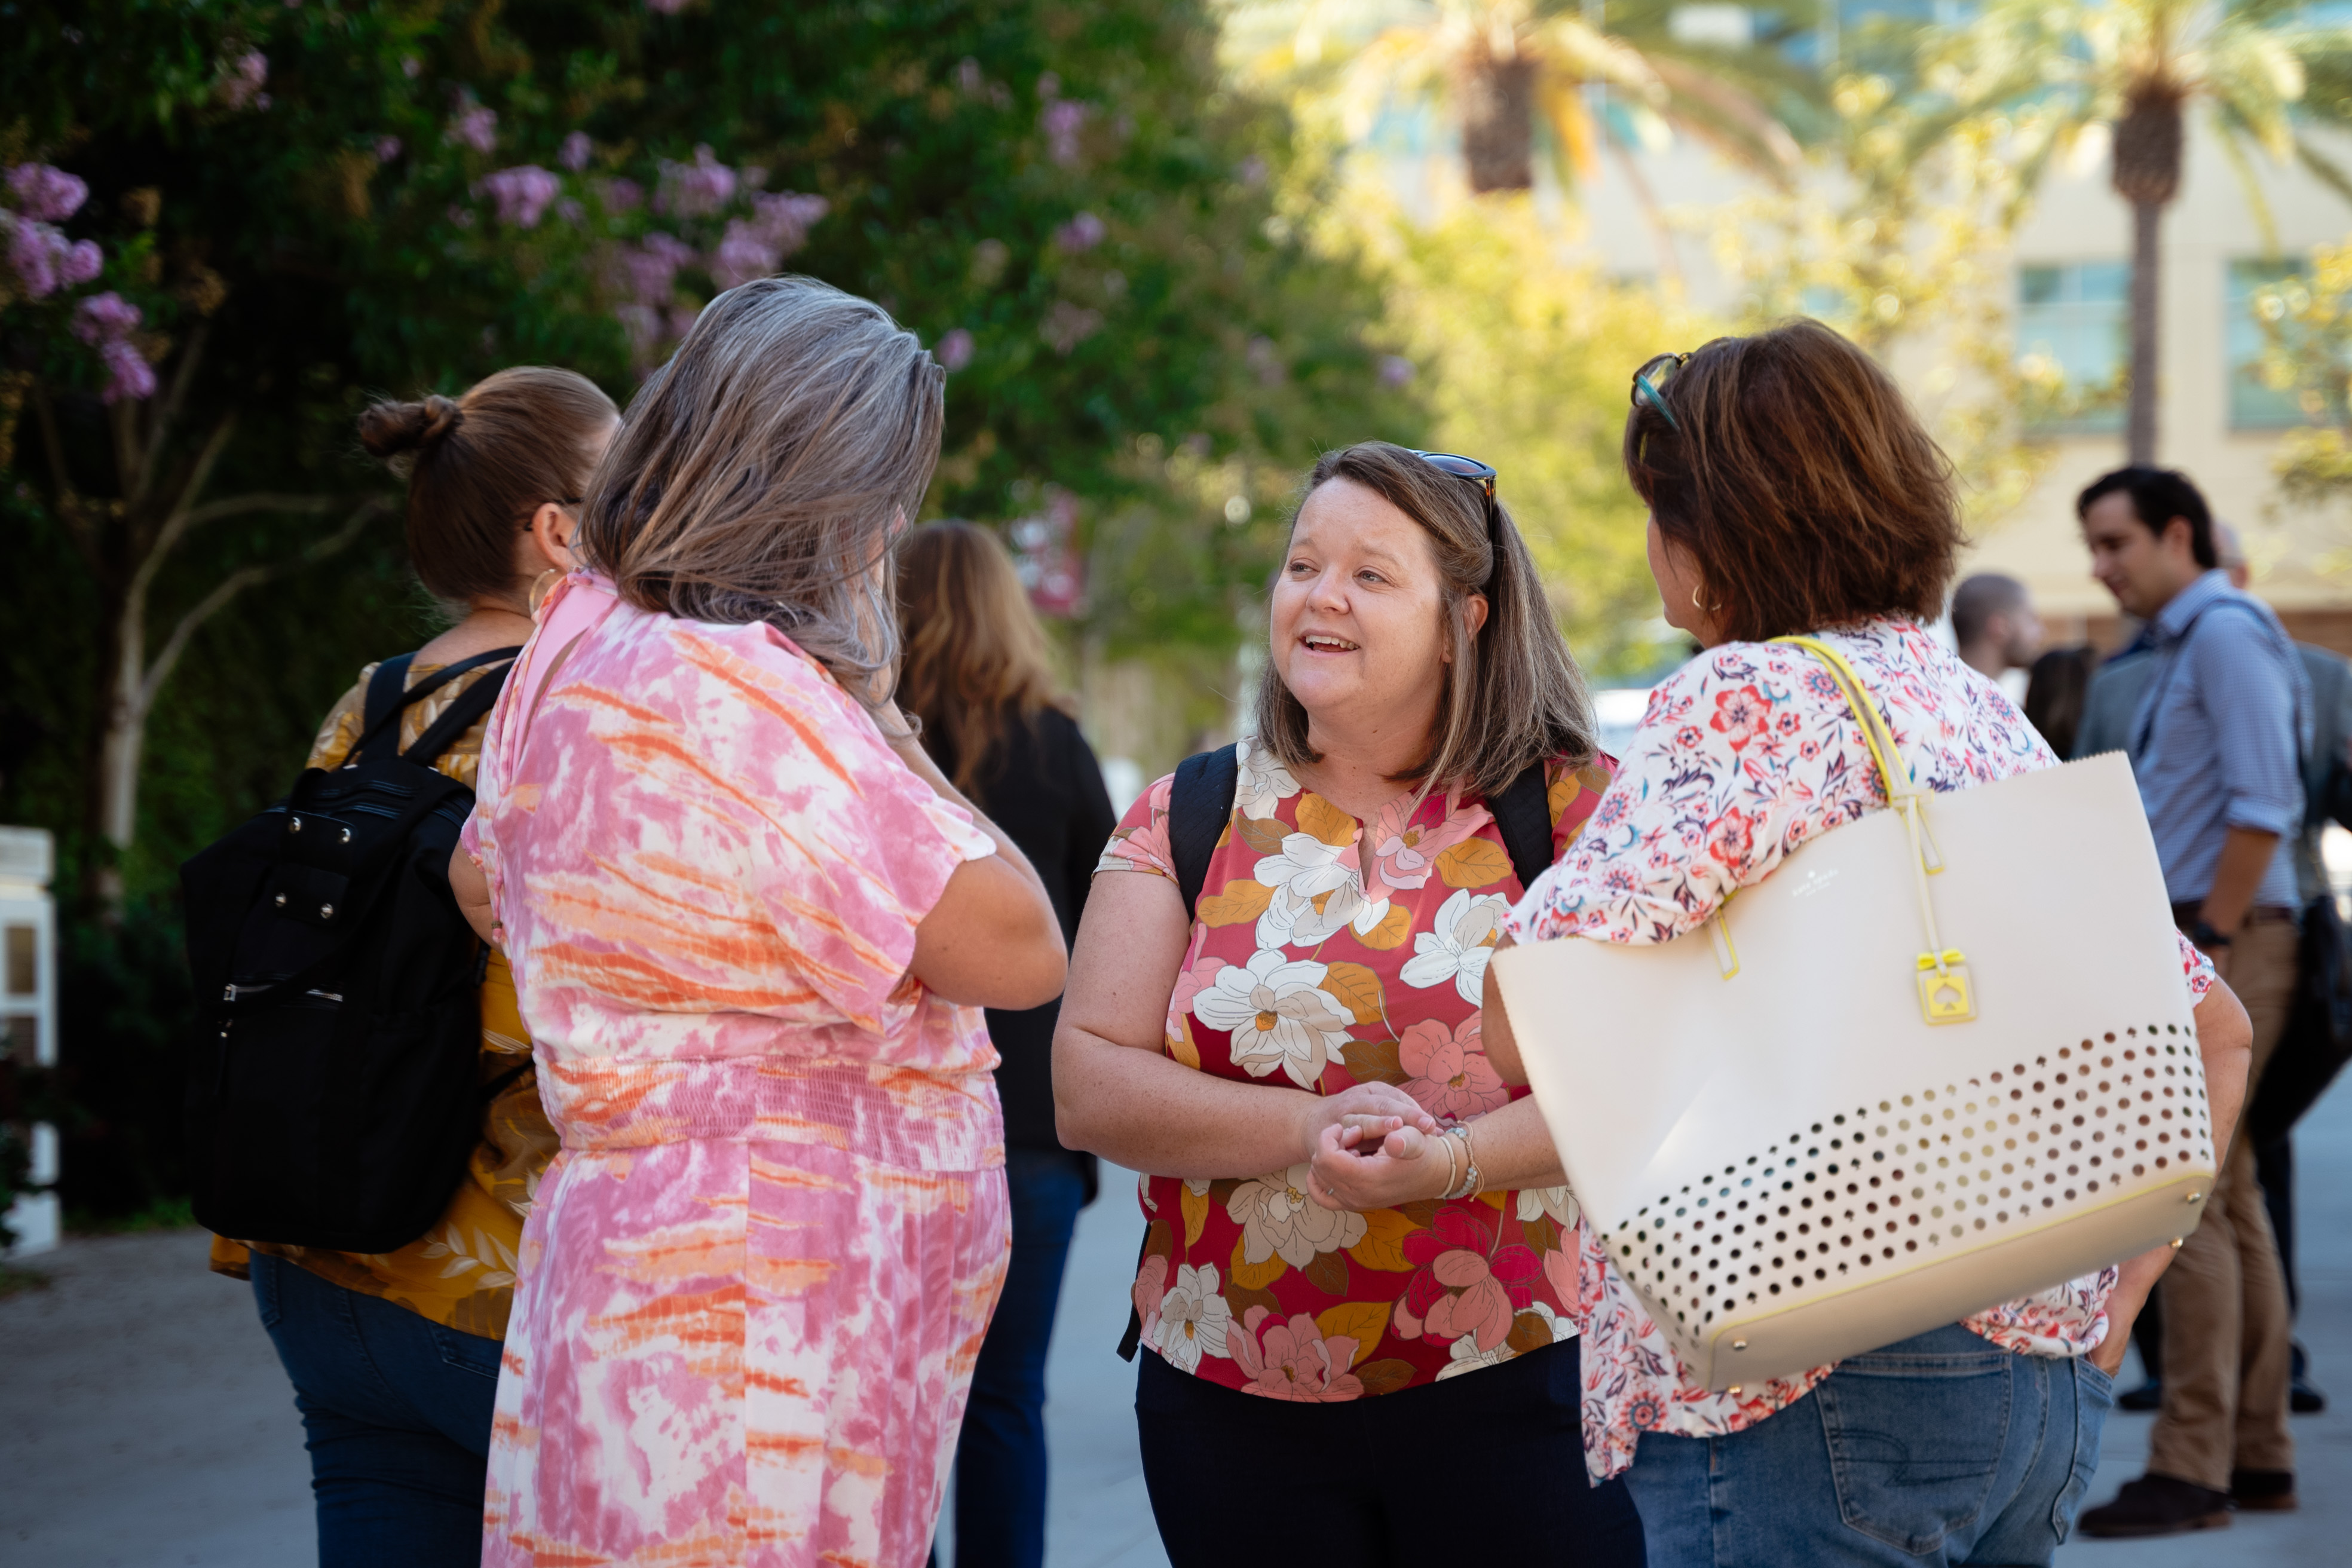 Three summit attendees conversing outside Musco Center for the Arts.